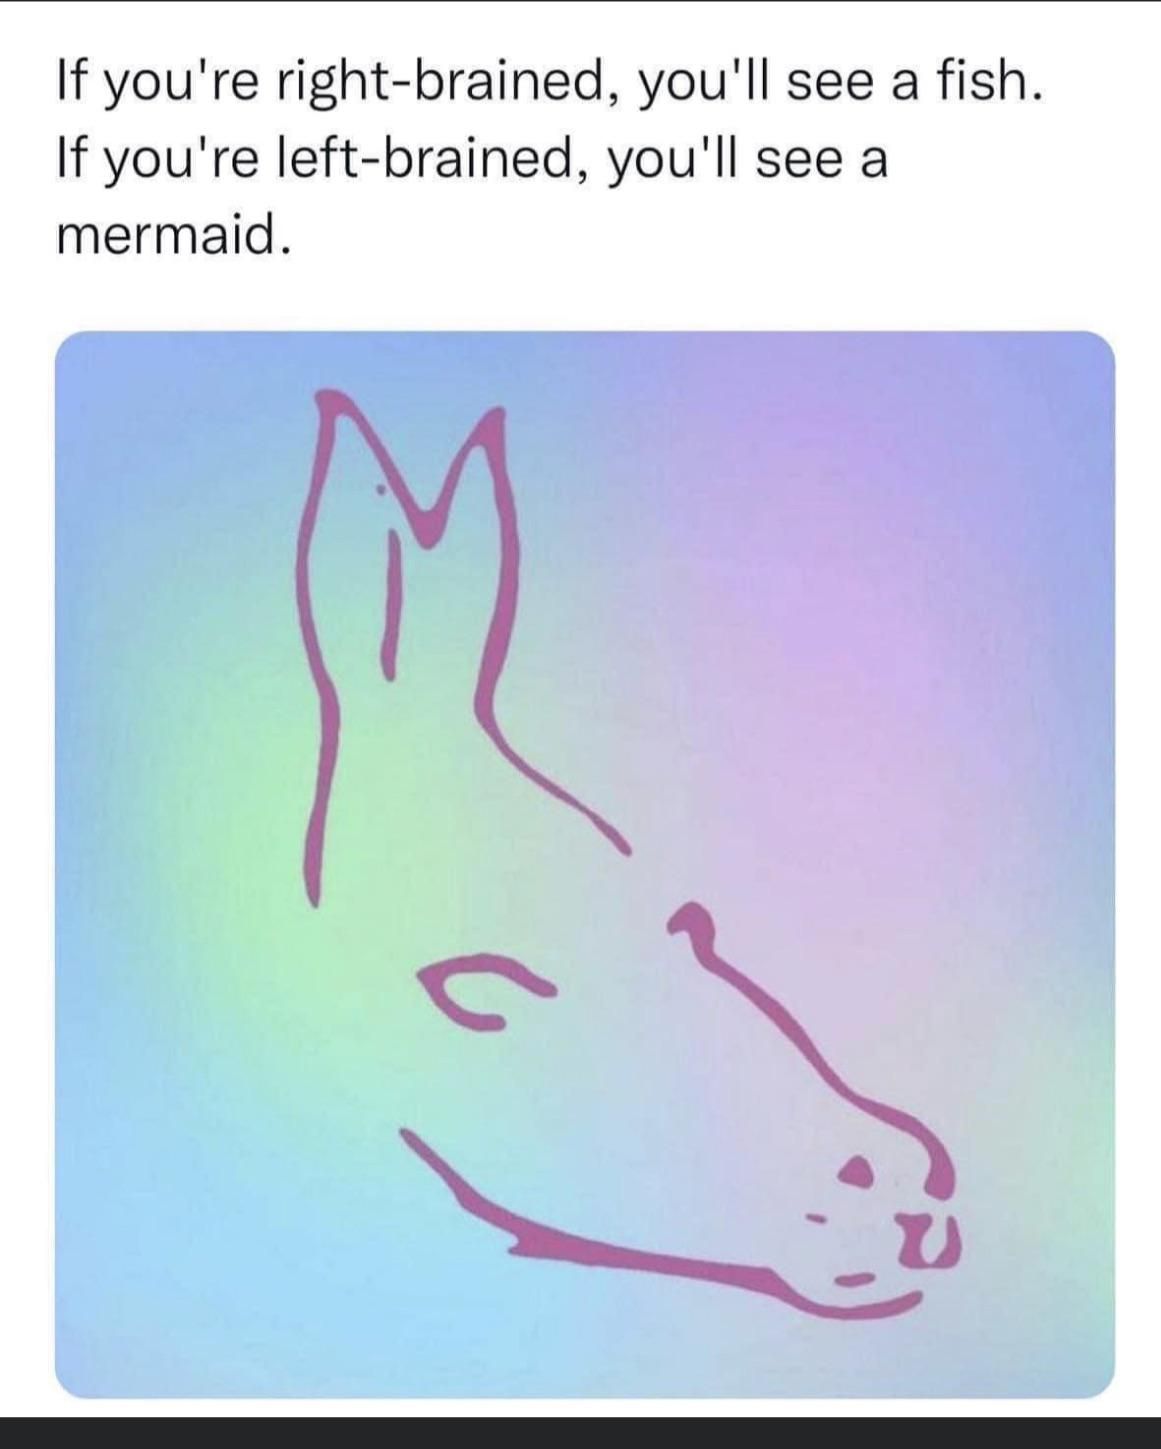 its clearly a fish